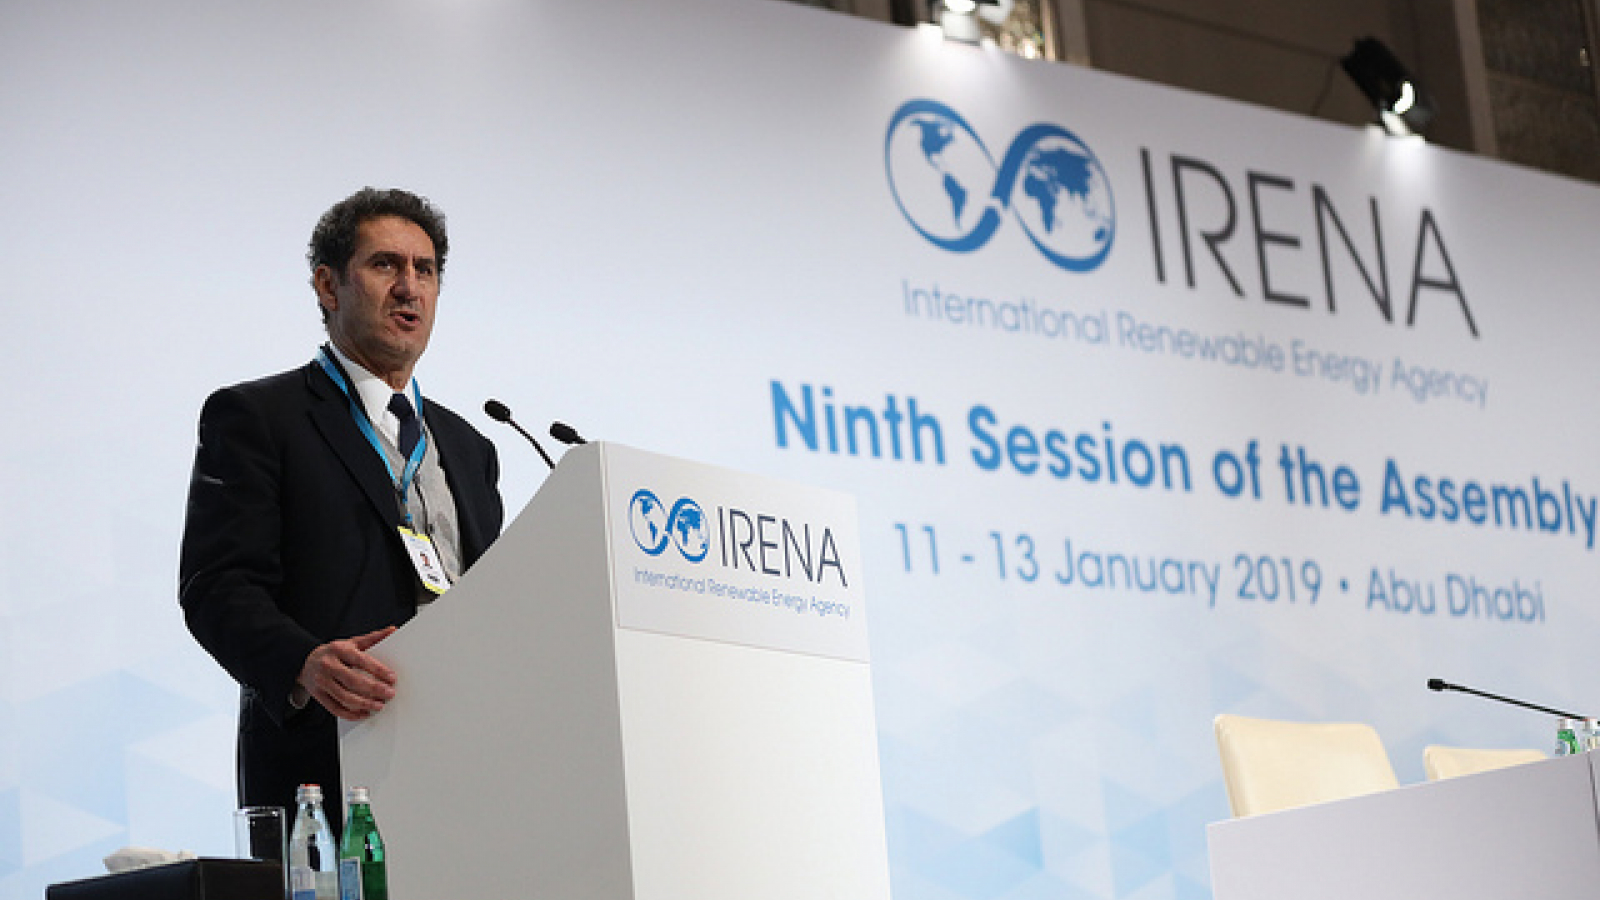 International Renewable Energy Agency elects new Director-General